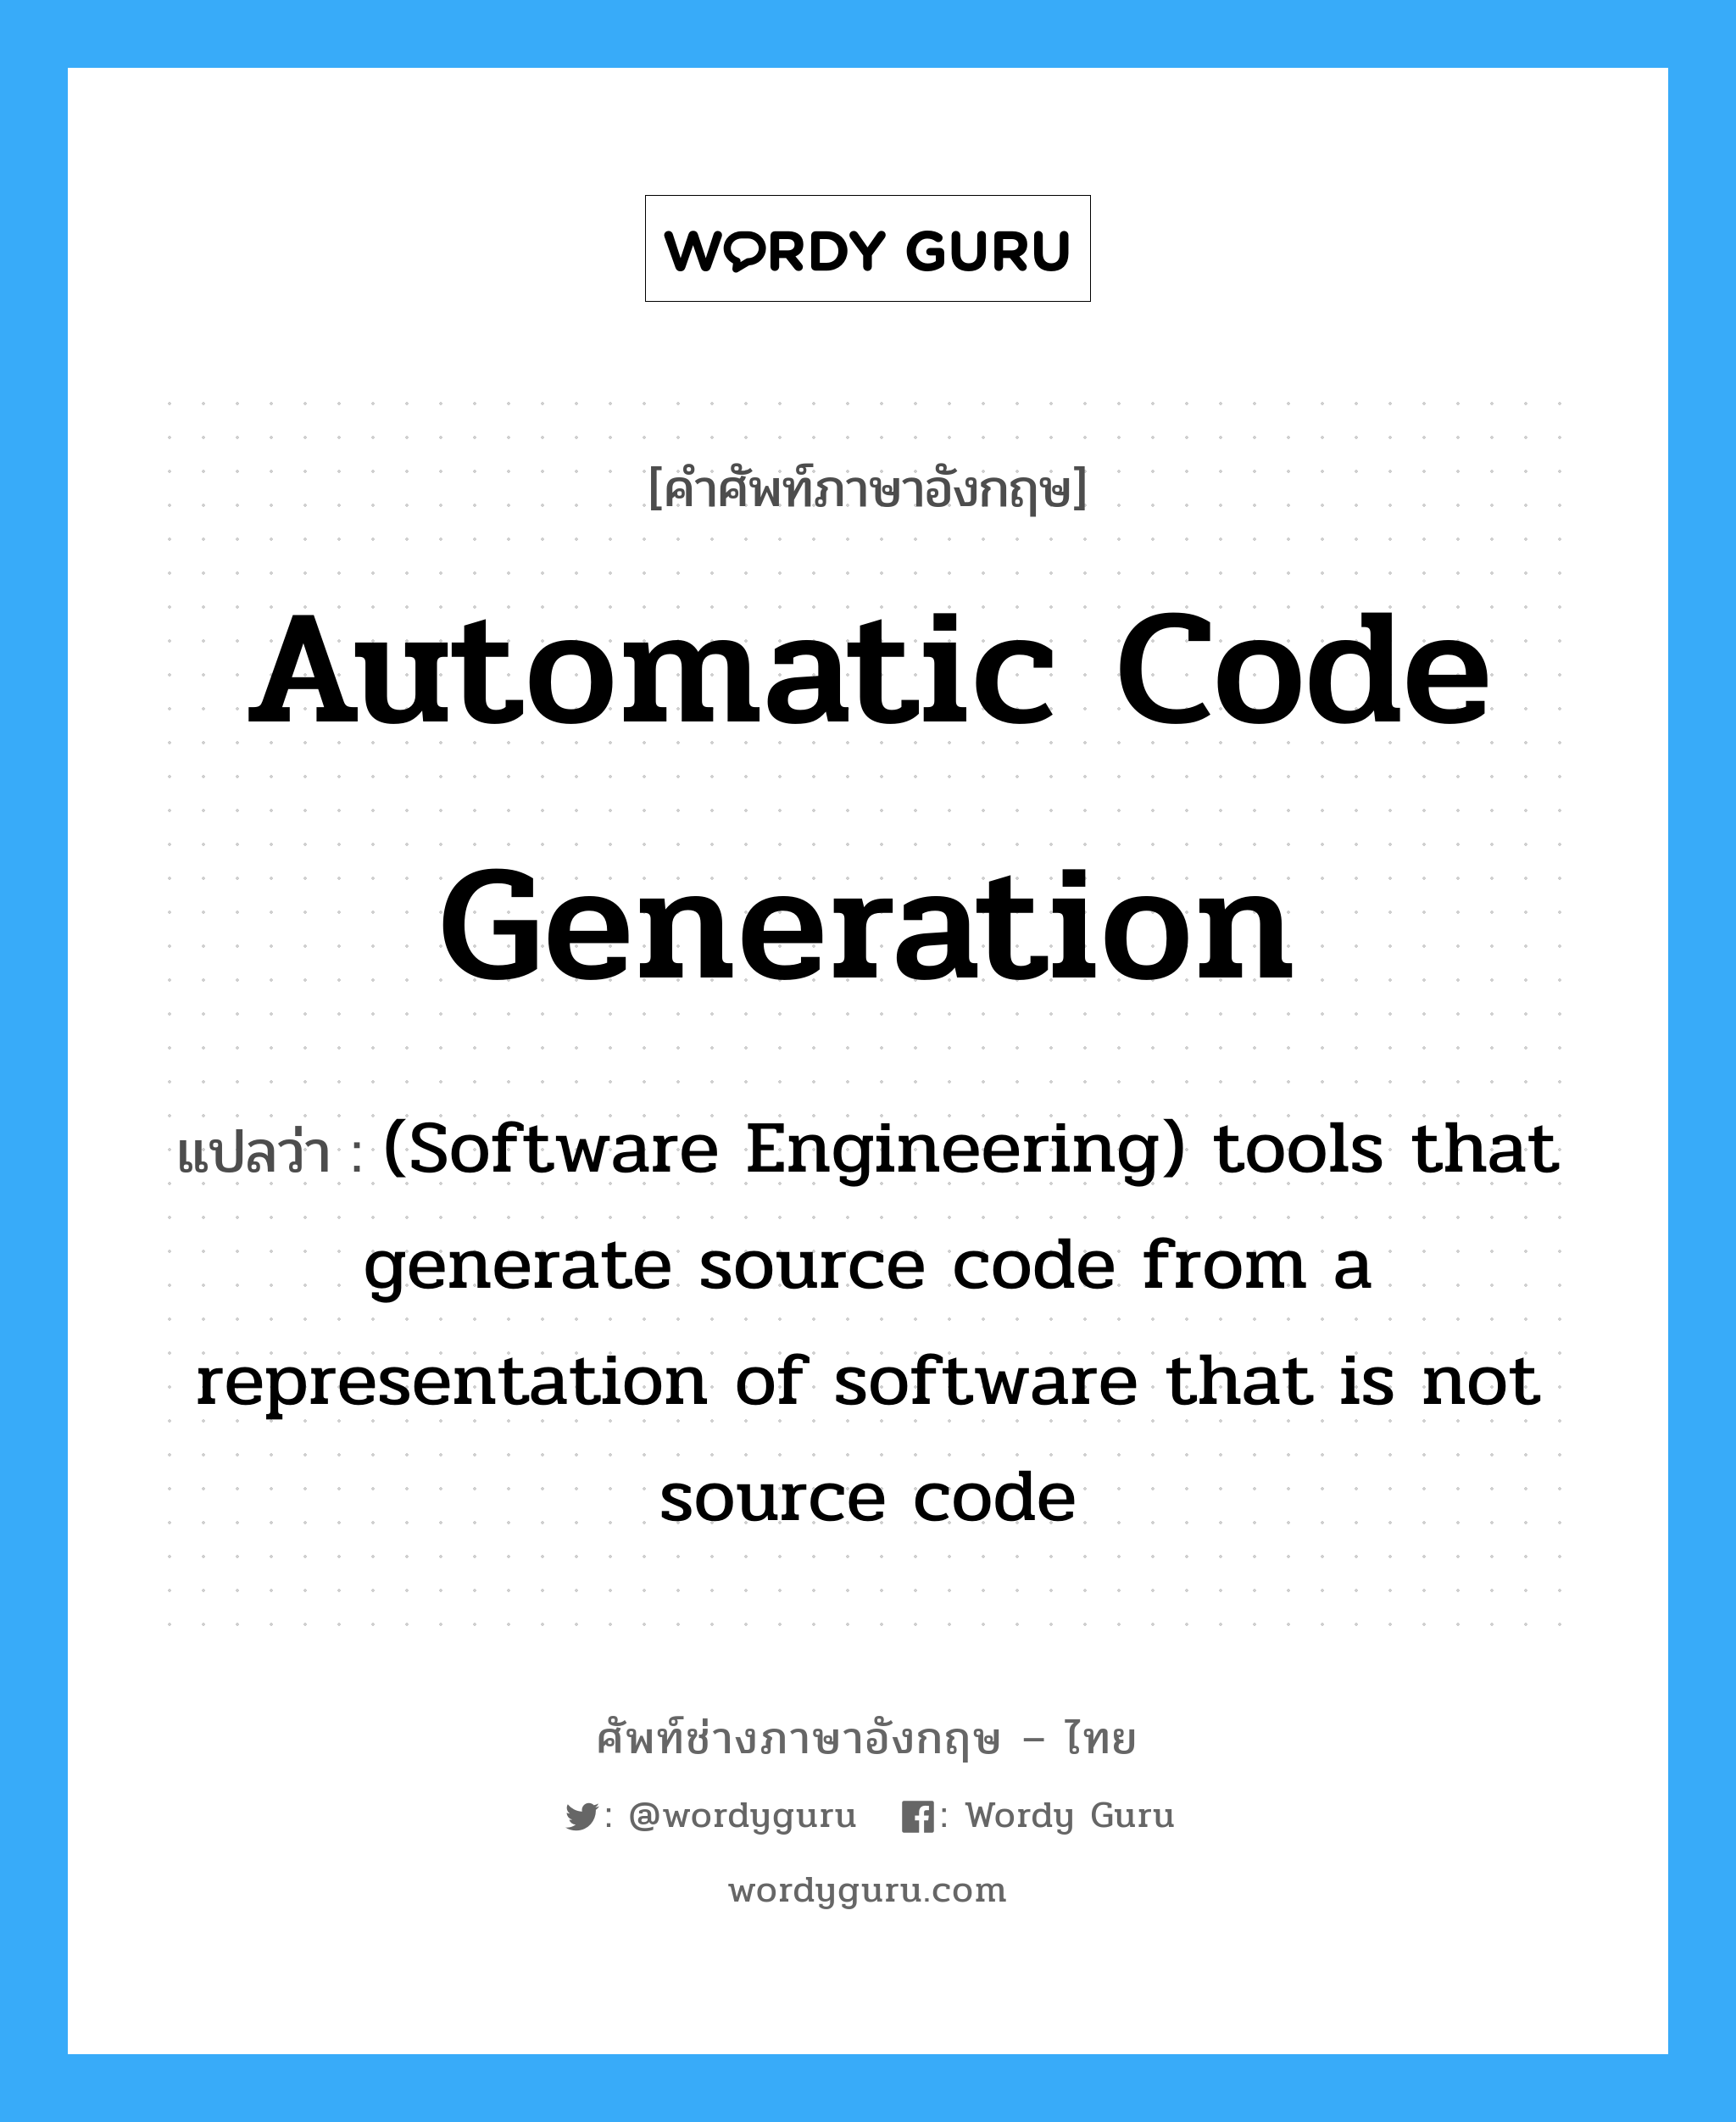 (Software Engineering) tools that generate source code from a representation of software that is not source code ภาษาอังกฤษ?, คำศัพท์ช่างภาษาอังกฤษ - ไทย (Software Engineering) tools that generate source code from a representation of software that is not source code คำศัพท์ภาษาอังกฤษ (Software Engineering) tools that generate source code from a representation of software that is not source code แปลว่า Automatic code generation